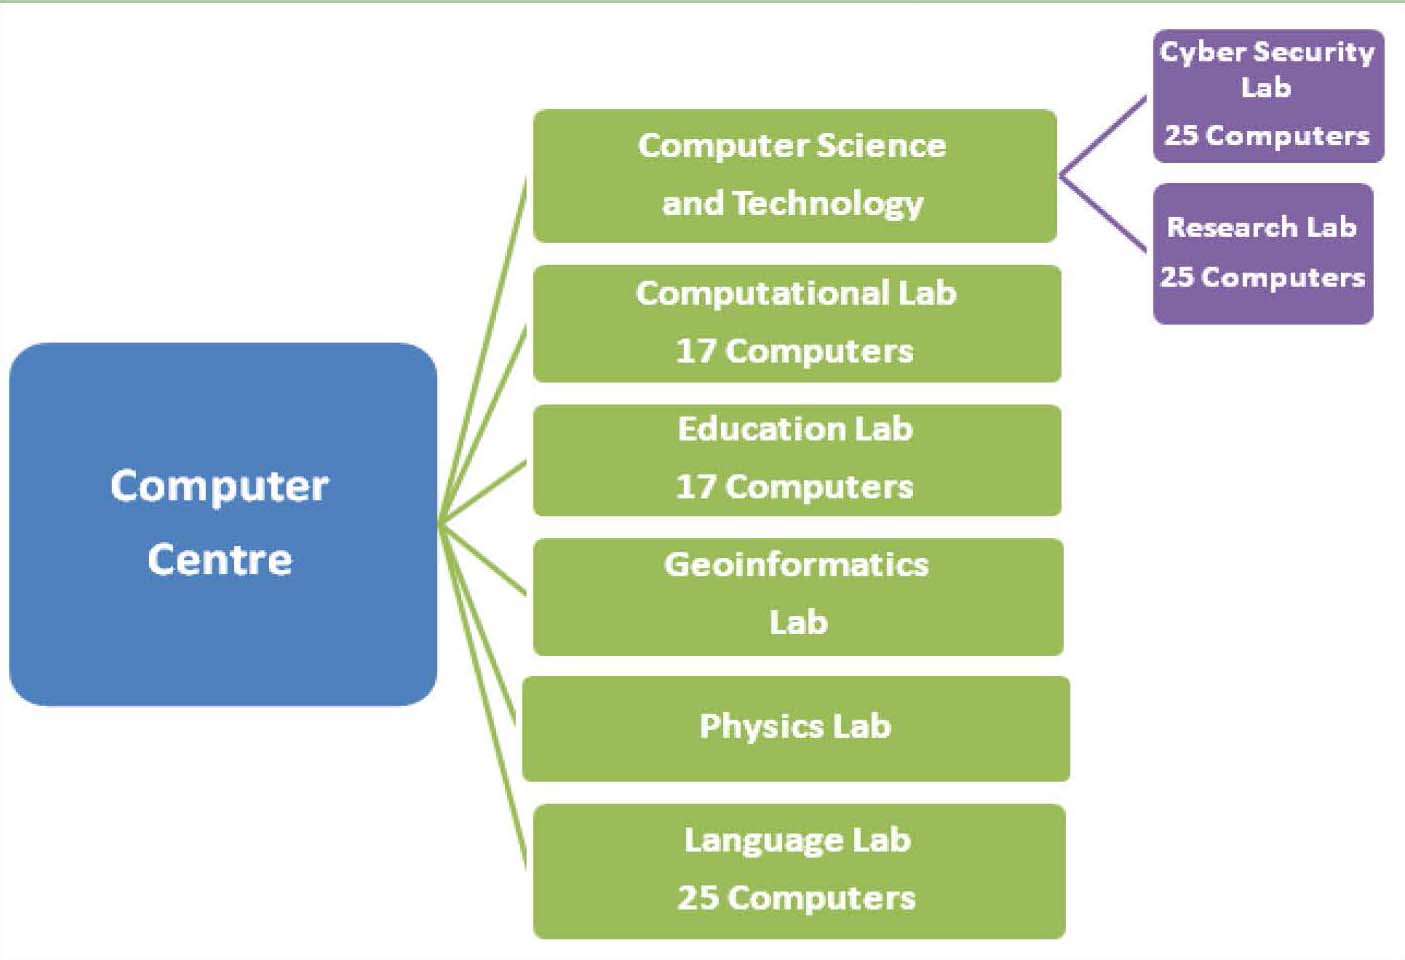 Different Labs under computer Centre